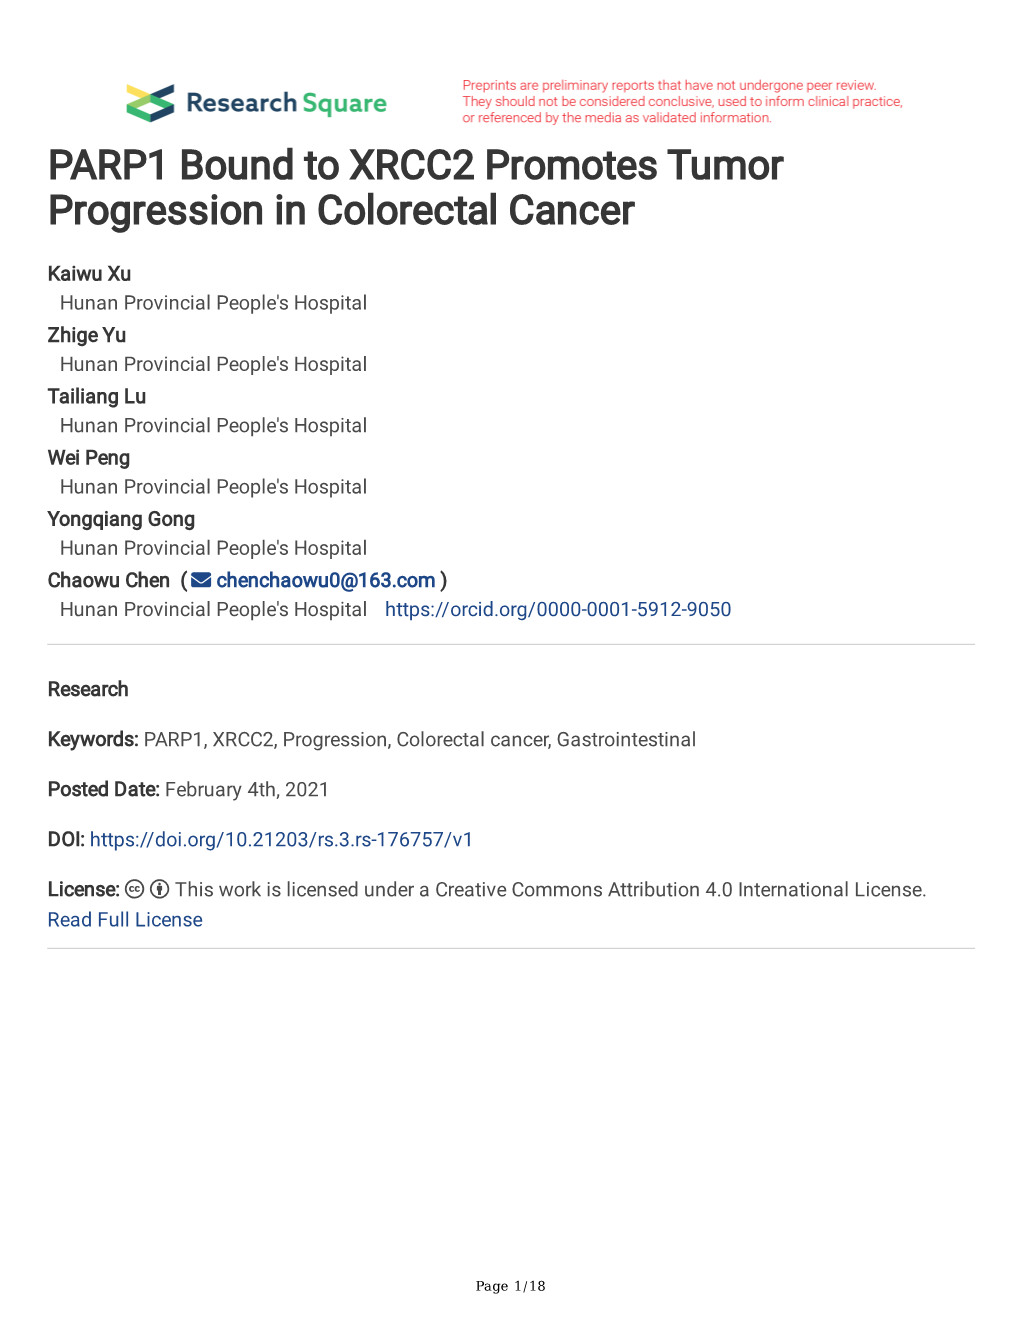 PARP1 Bound to XRCC2 Promotes Tumor Progression in Colorectal Cancer